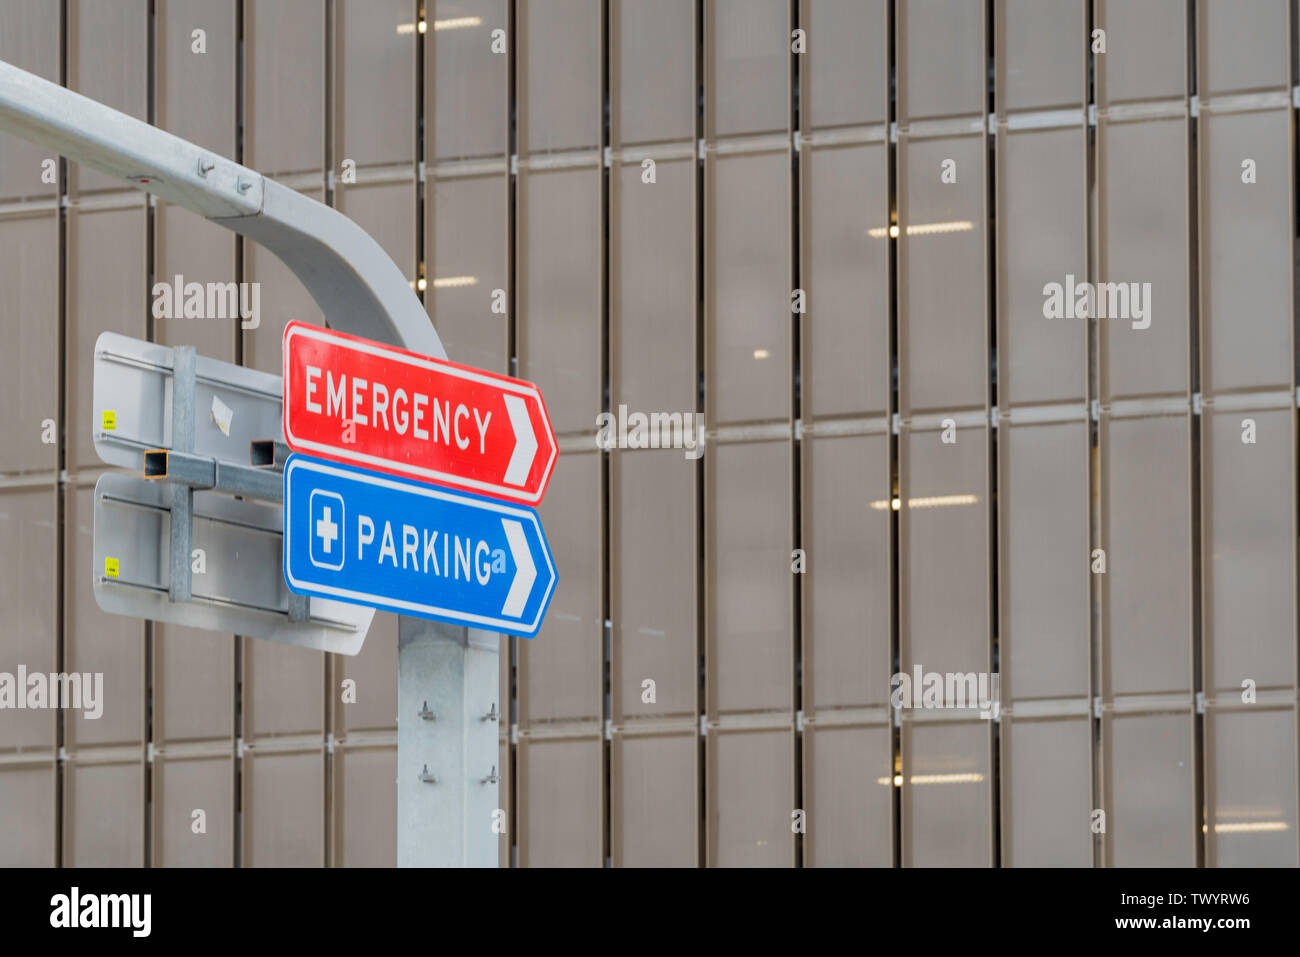 A red sign with white lettering saying Emergency and a blue sign with white lettering saying Parking at a hospital car park in Sydney, Australia Stock Photo